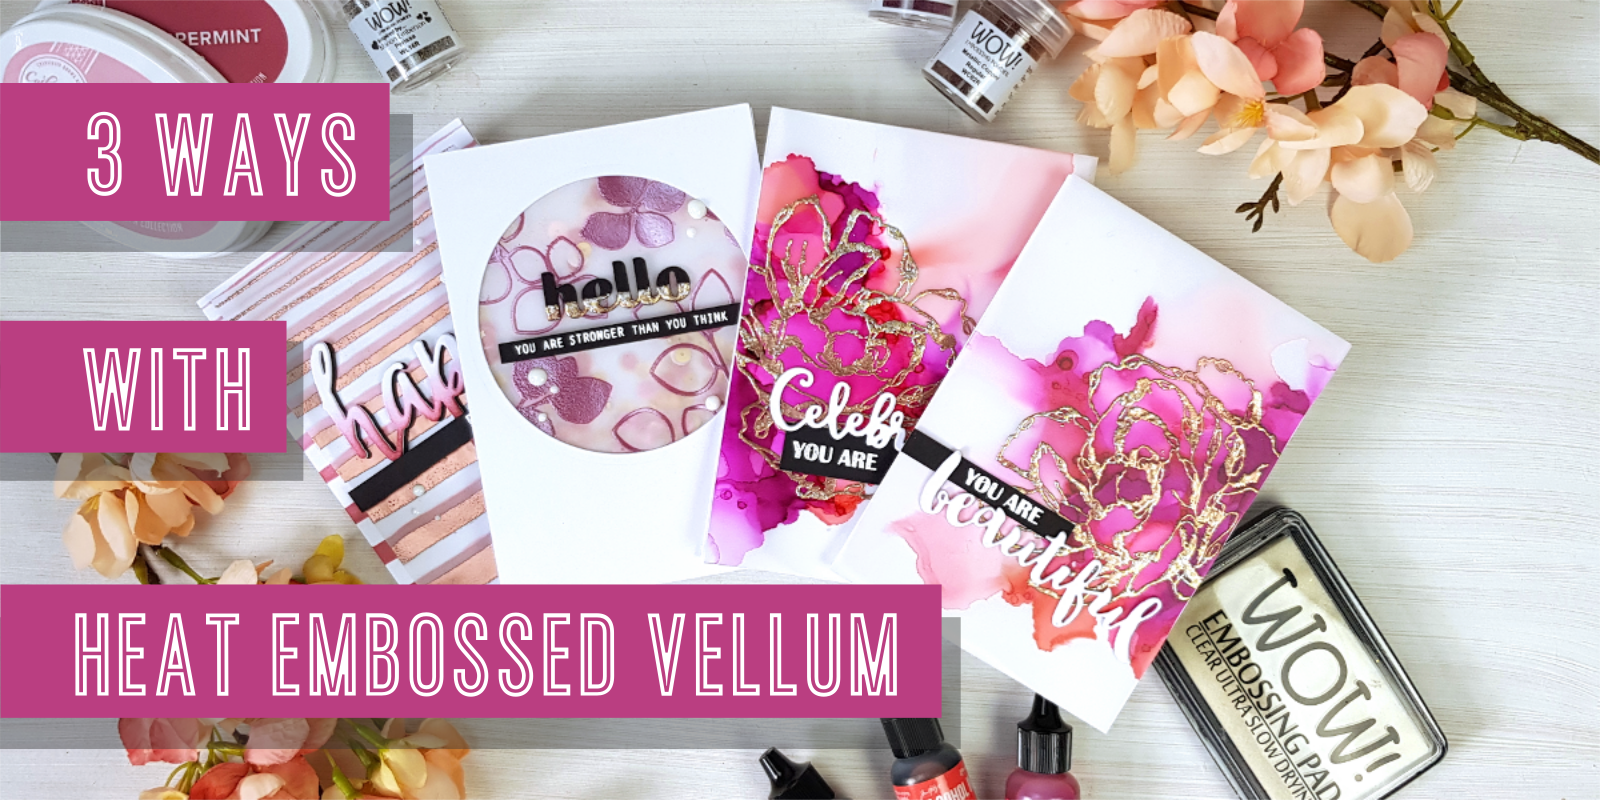 What is Vellum & How to Use It